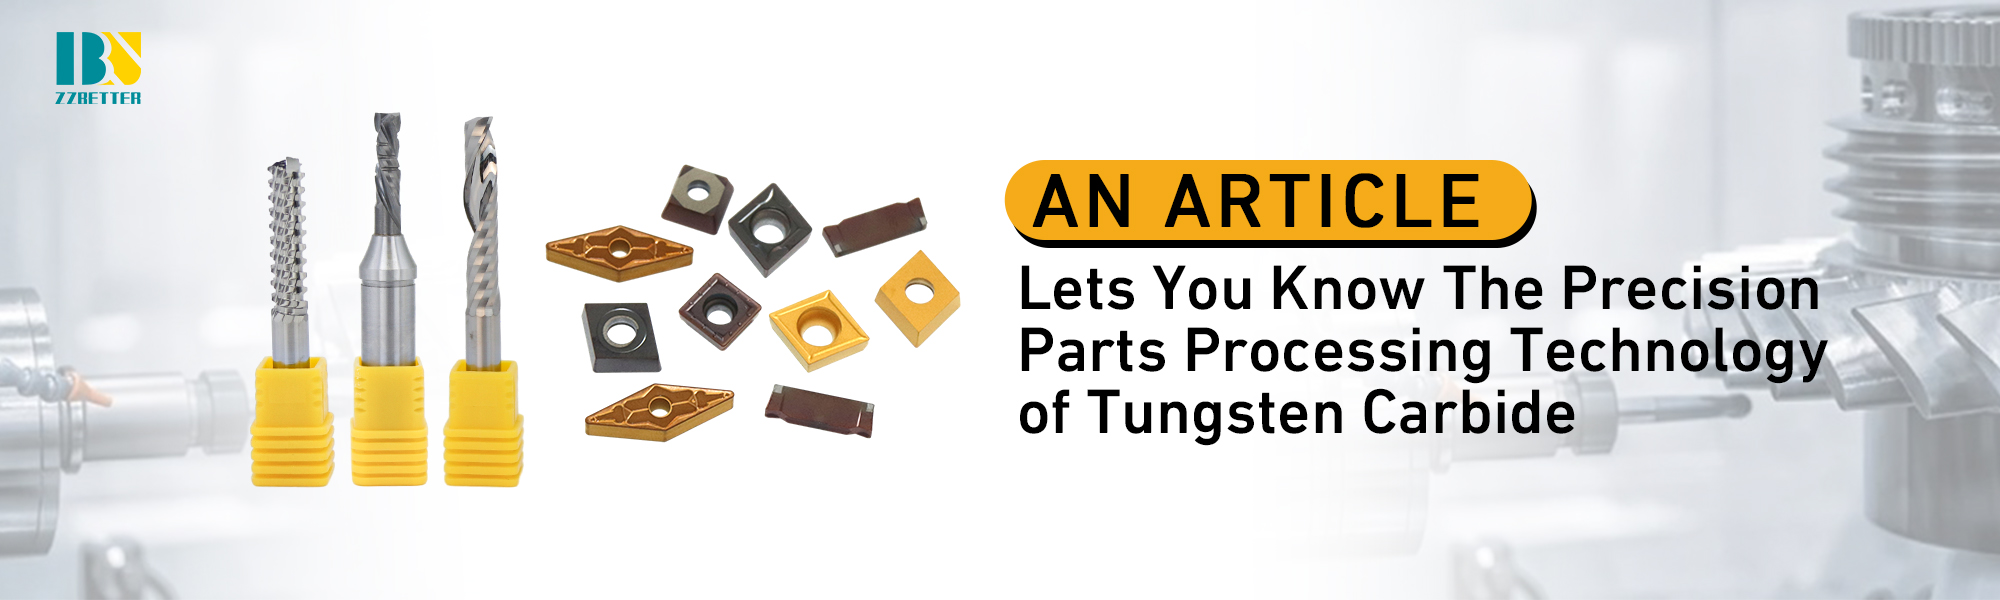 An Article Lets You Know :The Precision Parts Processing Technology of Tungsten Carbide